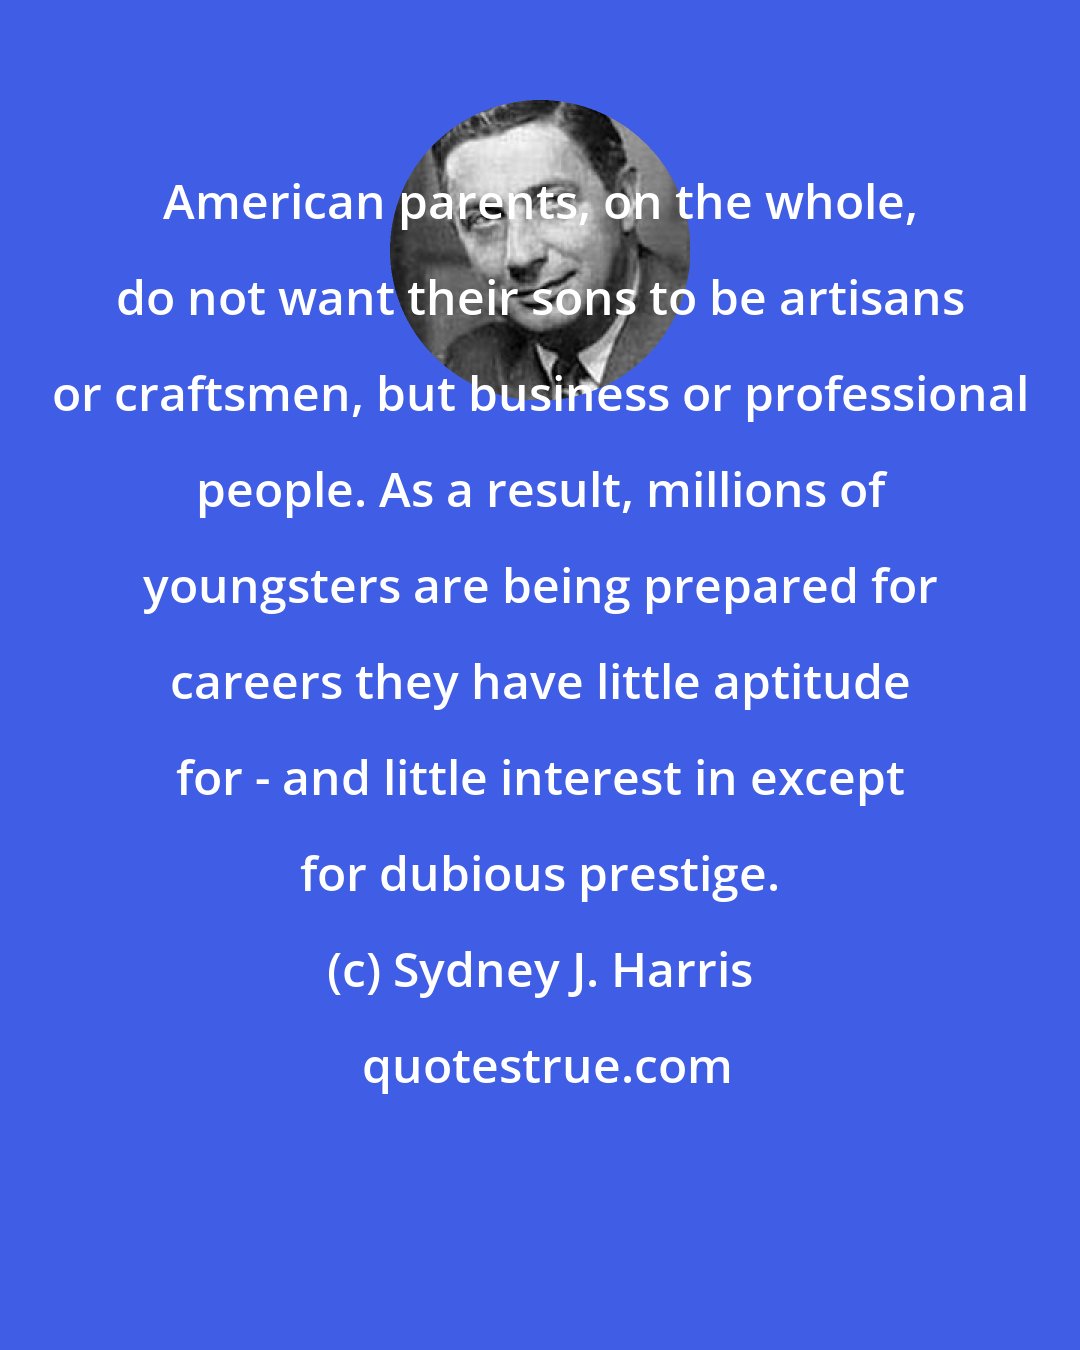 Sydney J. Harris: American parents, on the whole, do not want their sons to be artisans or craftsmen, but business or professional people. As a result, millions of youngsters are being prepared for careers they have little aptitude for - and little interest in except for dubious prestige.